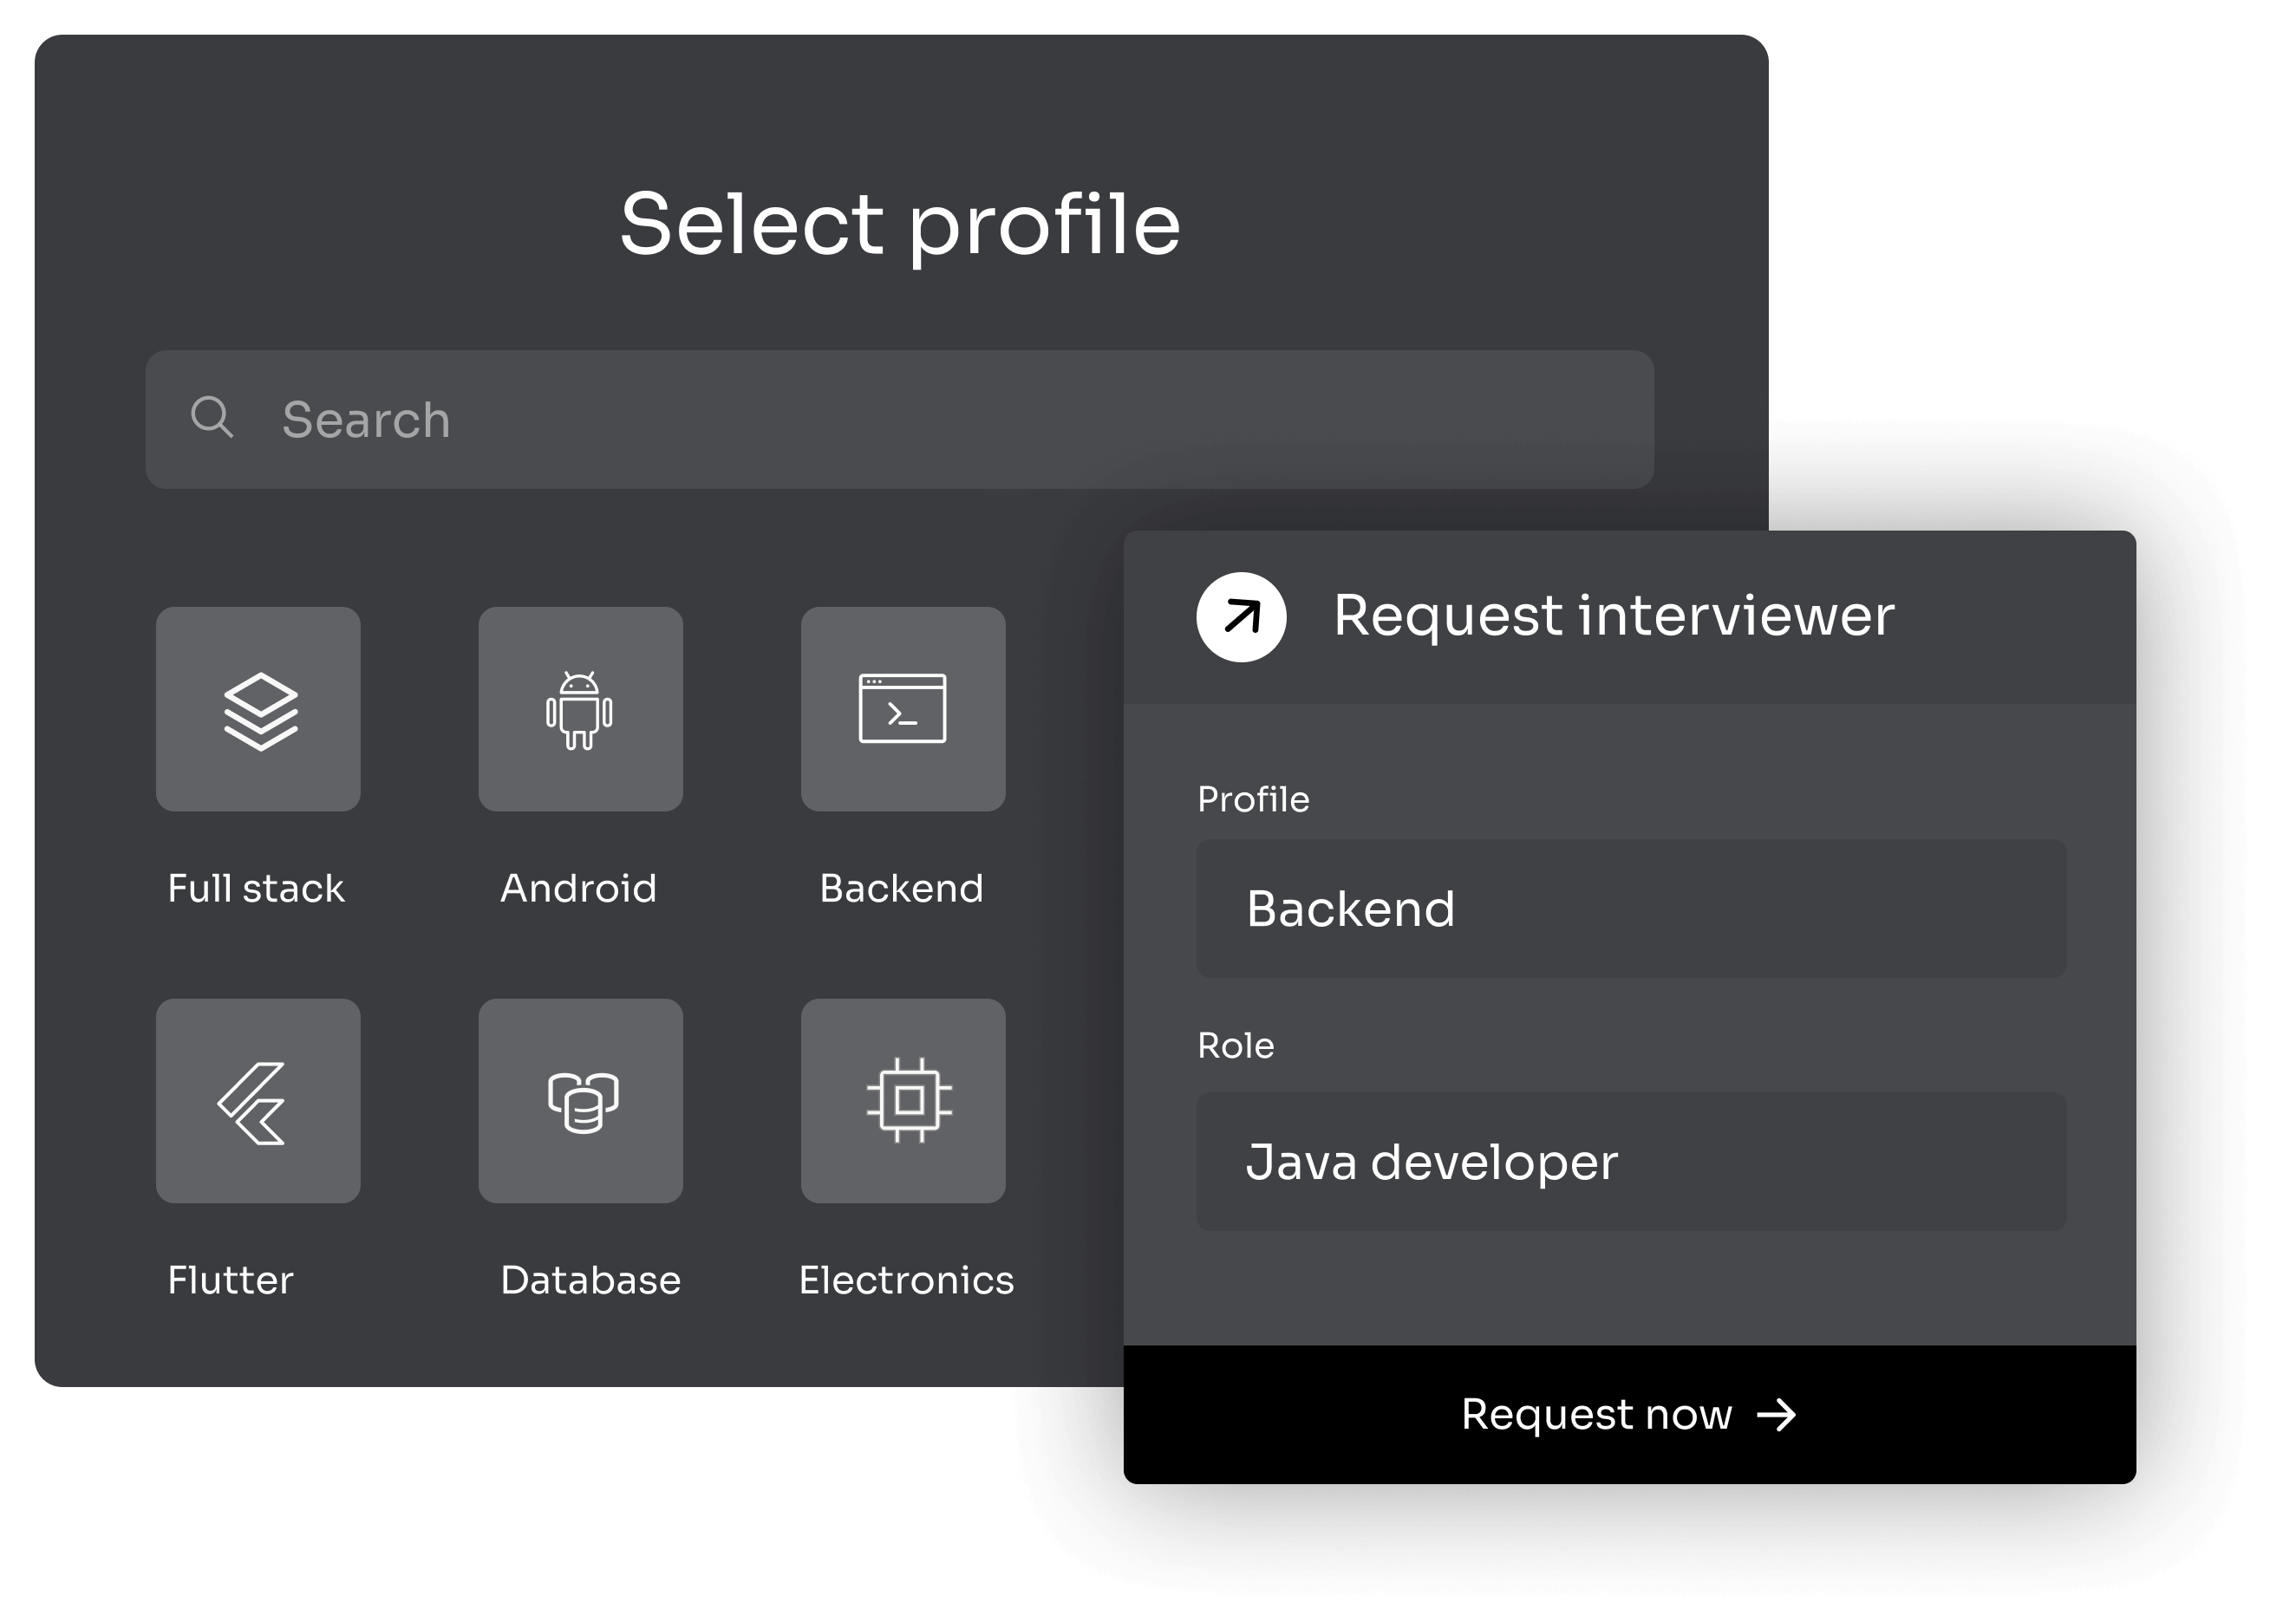 Select profile & template to request interviewer